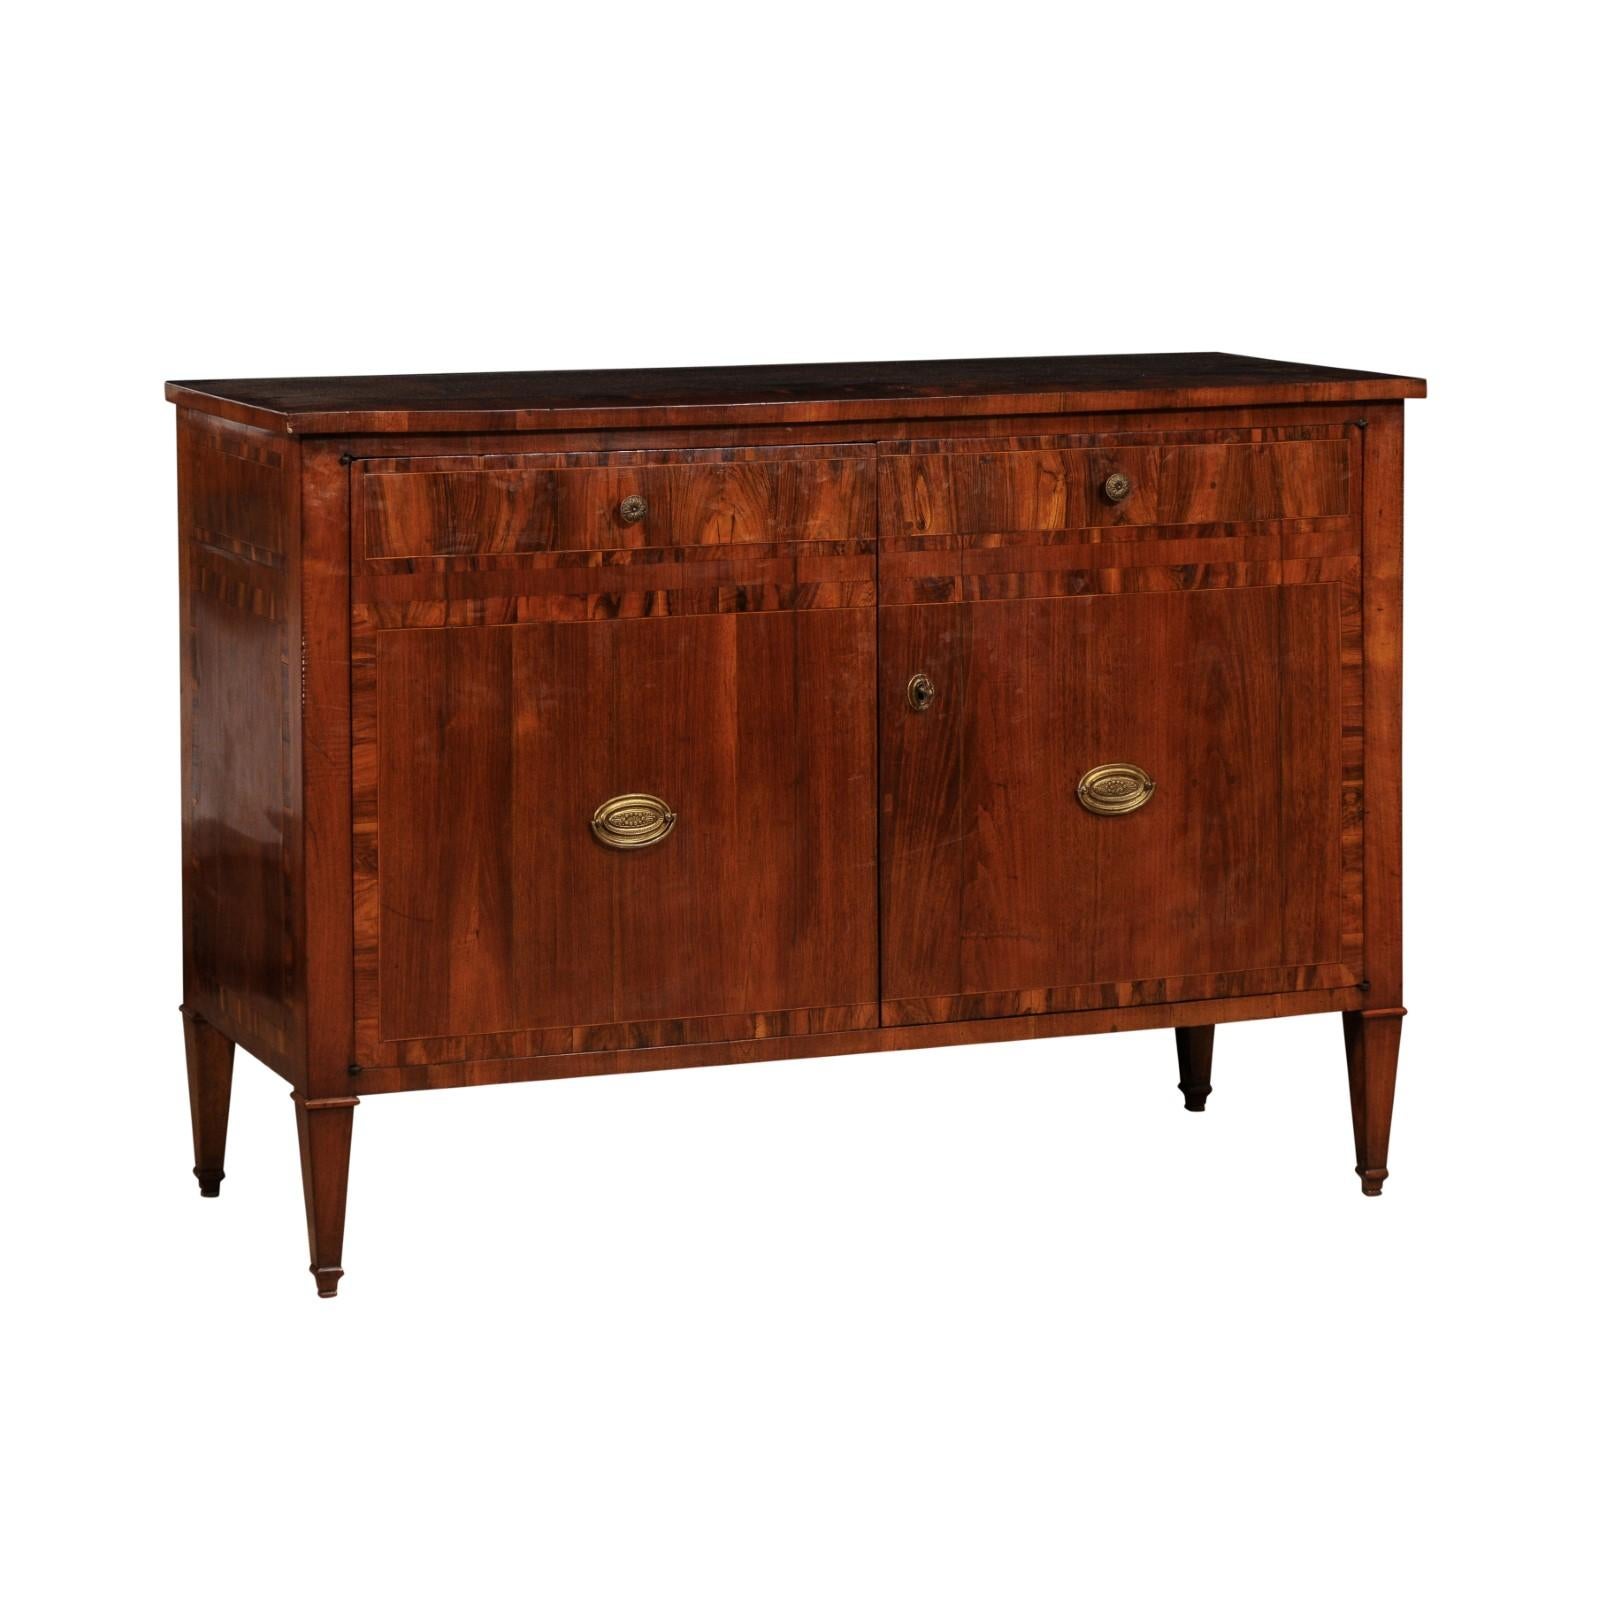 An Italian walnut and mahogany buffet from circa 1780 with cross banding, two doors and tapered legs. Infuse your home with the timeless elegance of this Italian walnut and mahogany buffet, a magnificent piece dating back to circa 1780. Crafted with